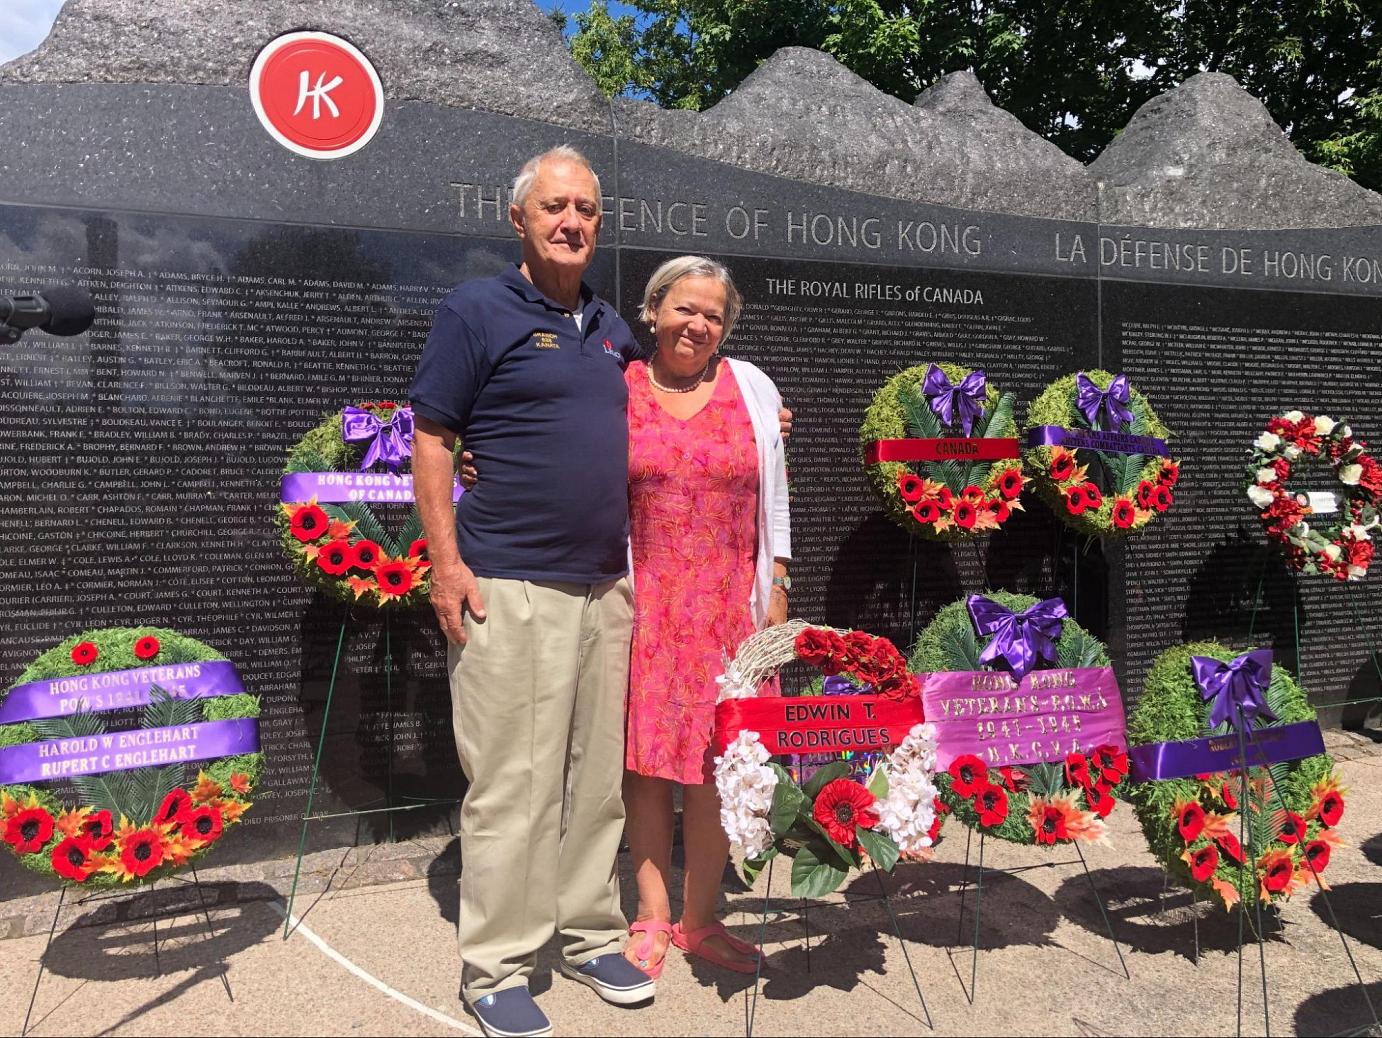 Maureen Rodrigues and her partner Gary Pitts at the Memorial Wall